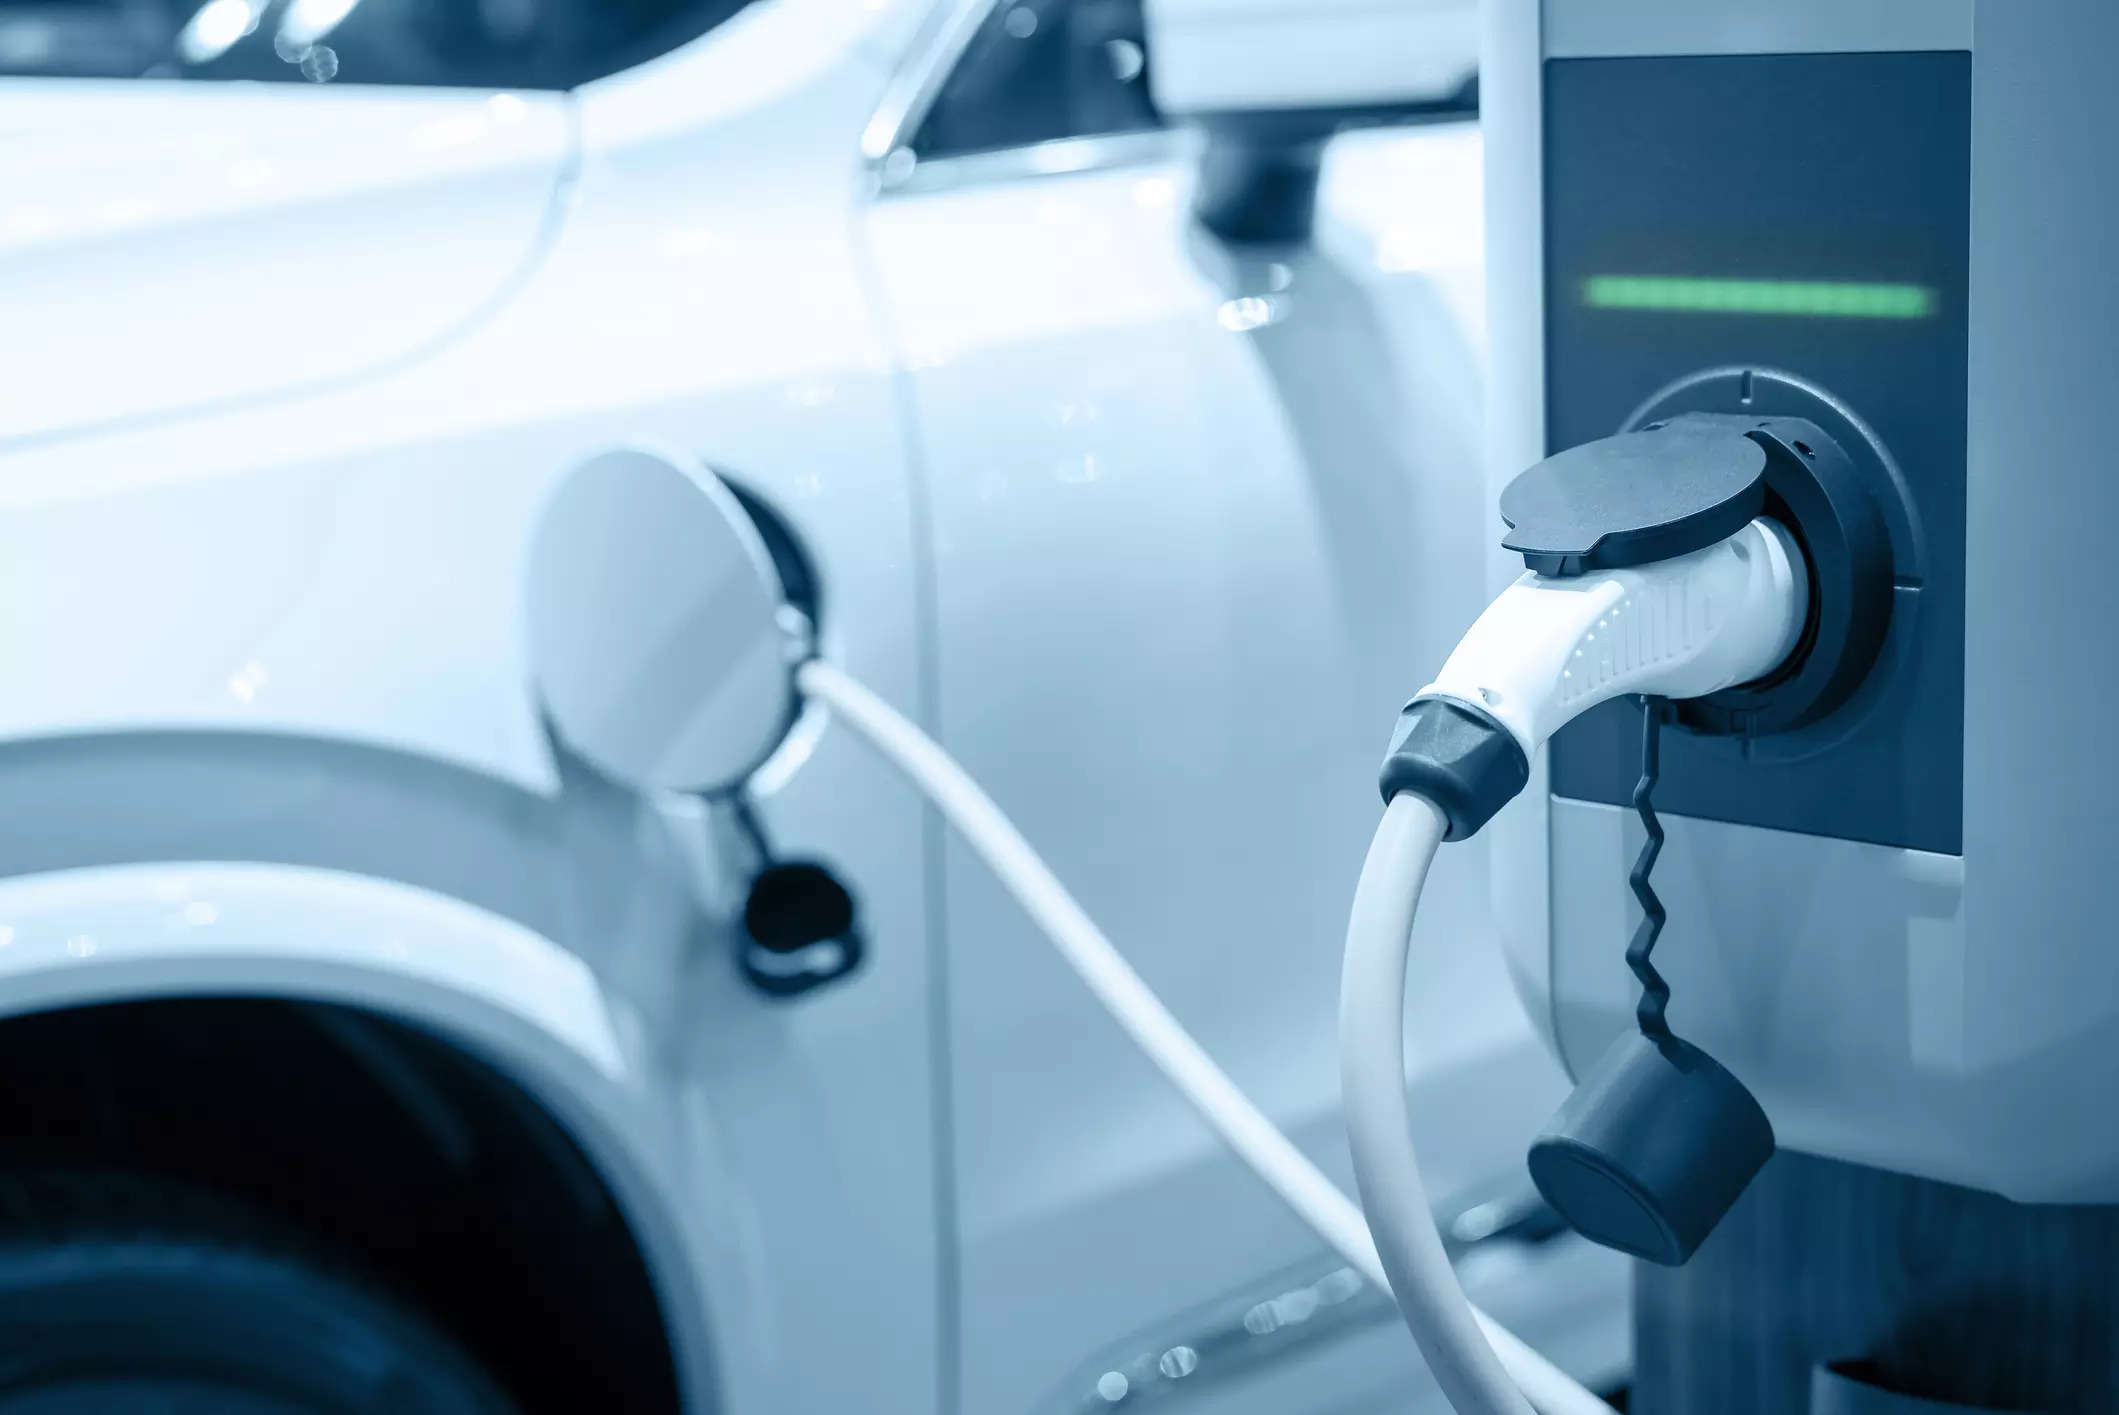  Solutions provided includes charger management software solution for EV charging, battery swapping management system, EV fleet management system and software to support smart charging and grid load management. 